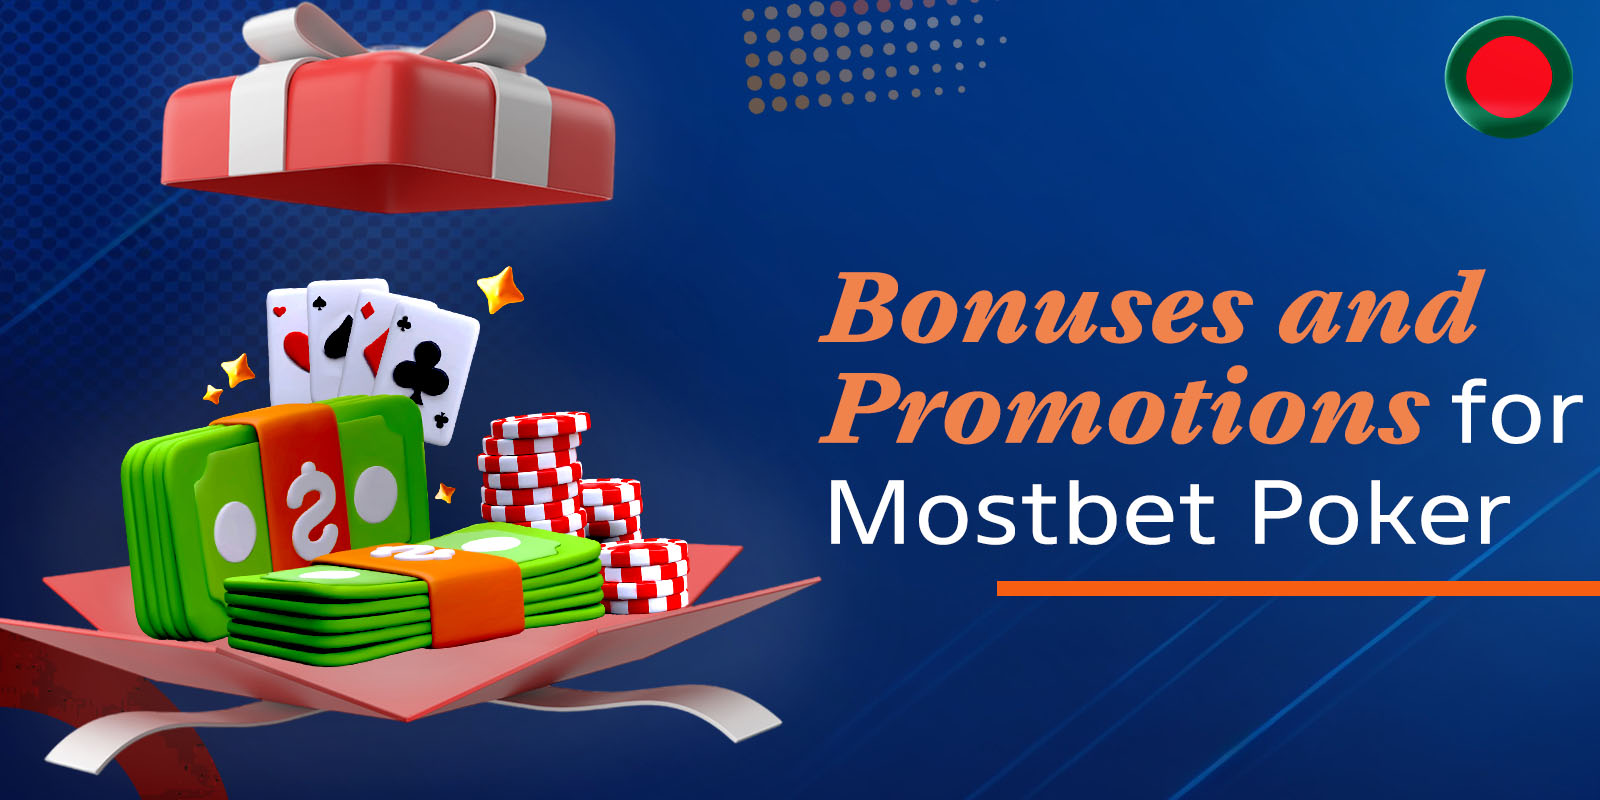 Best Bonuses and Promotions